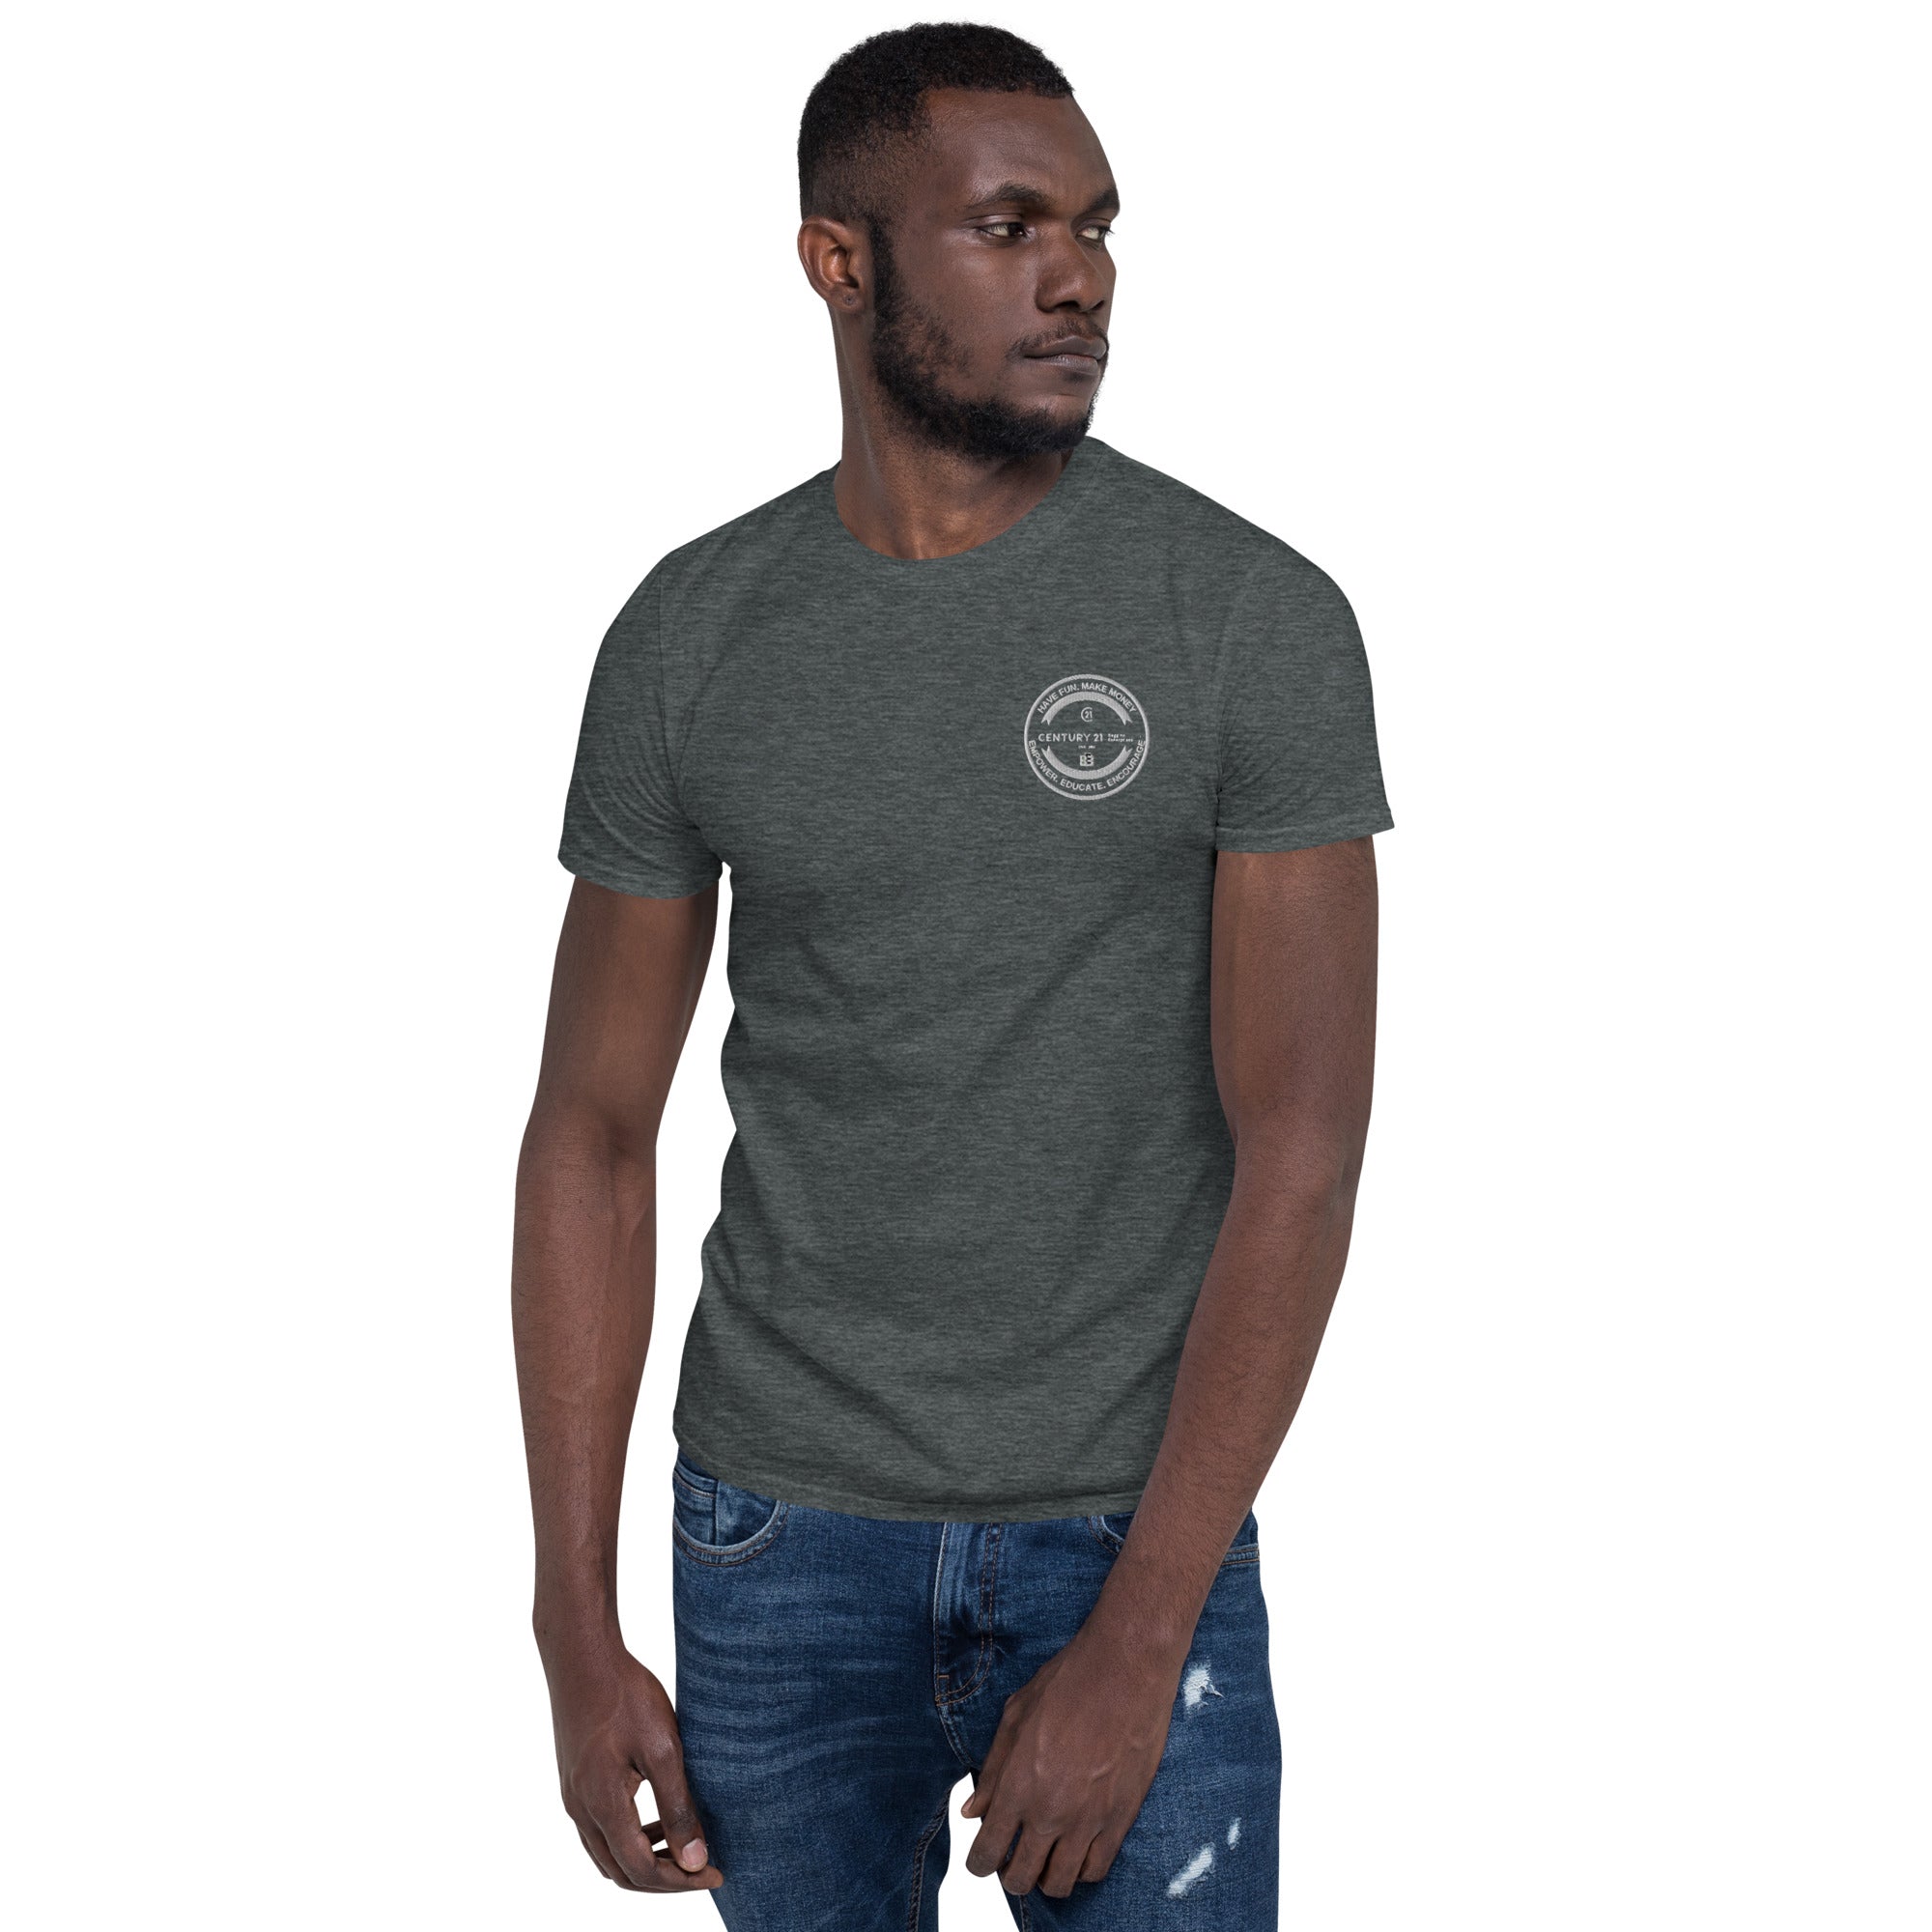 C21 Beggins Embroidered Cirlce Seal Short-Sleeve T-Shirt